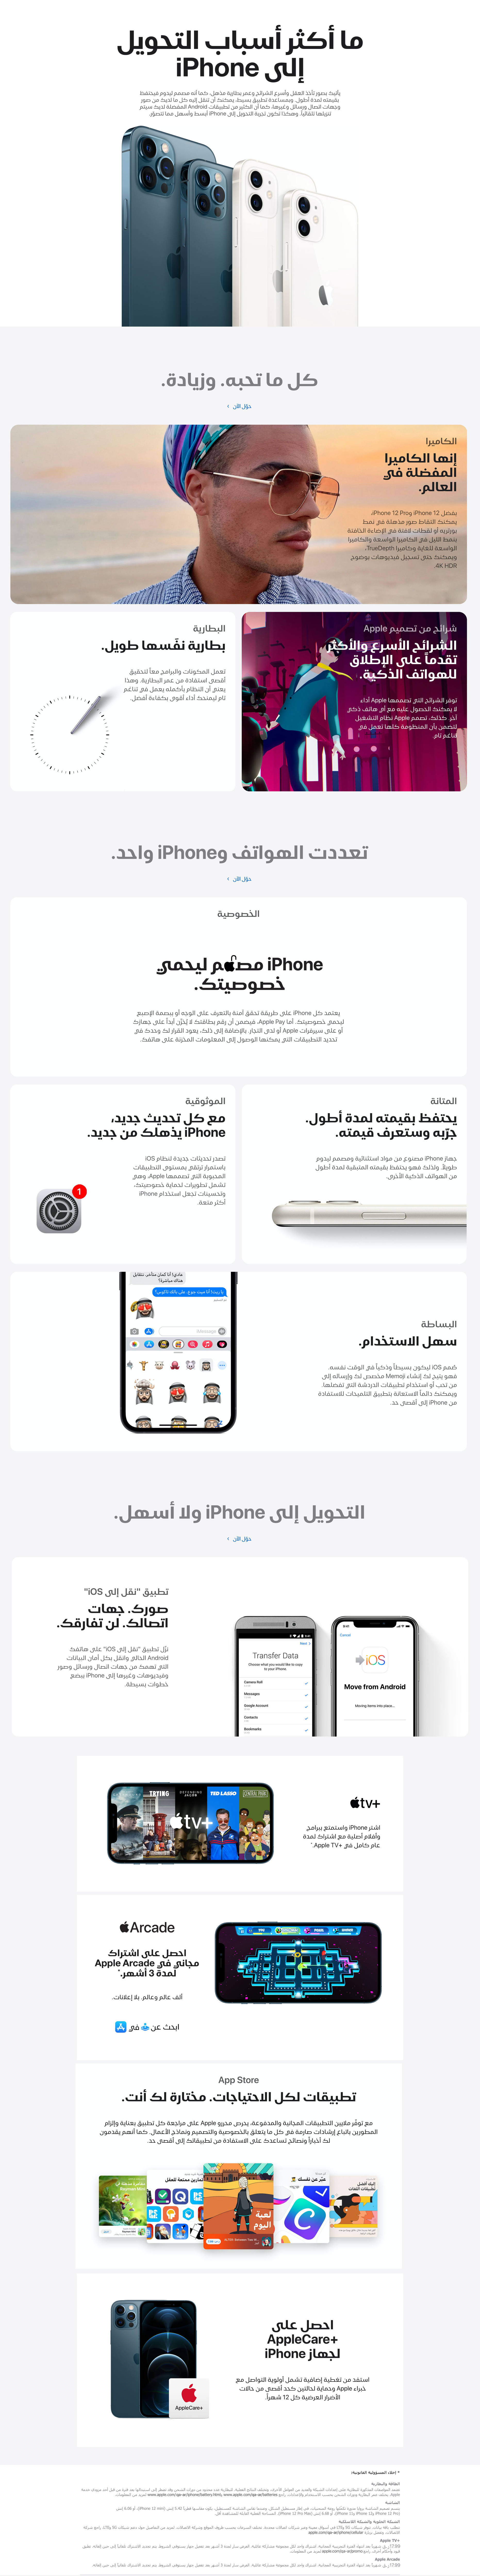 iPhone Switchers Campaign